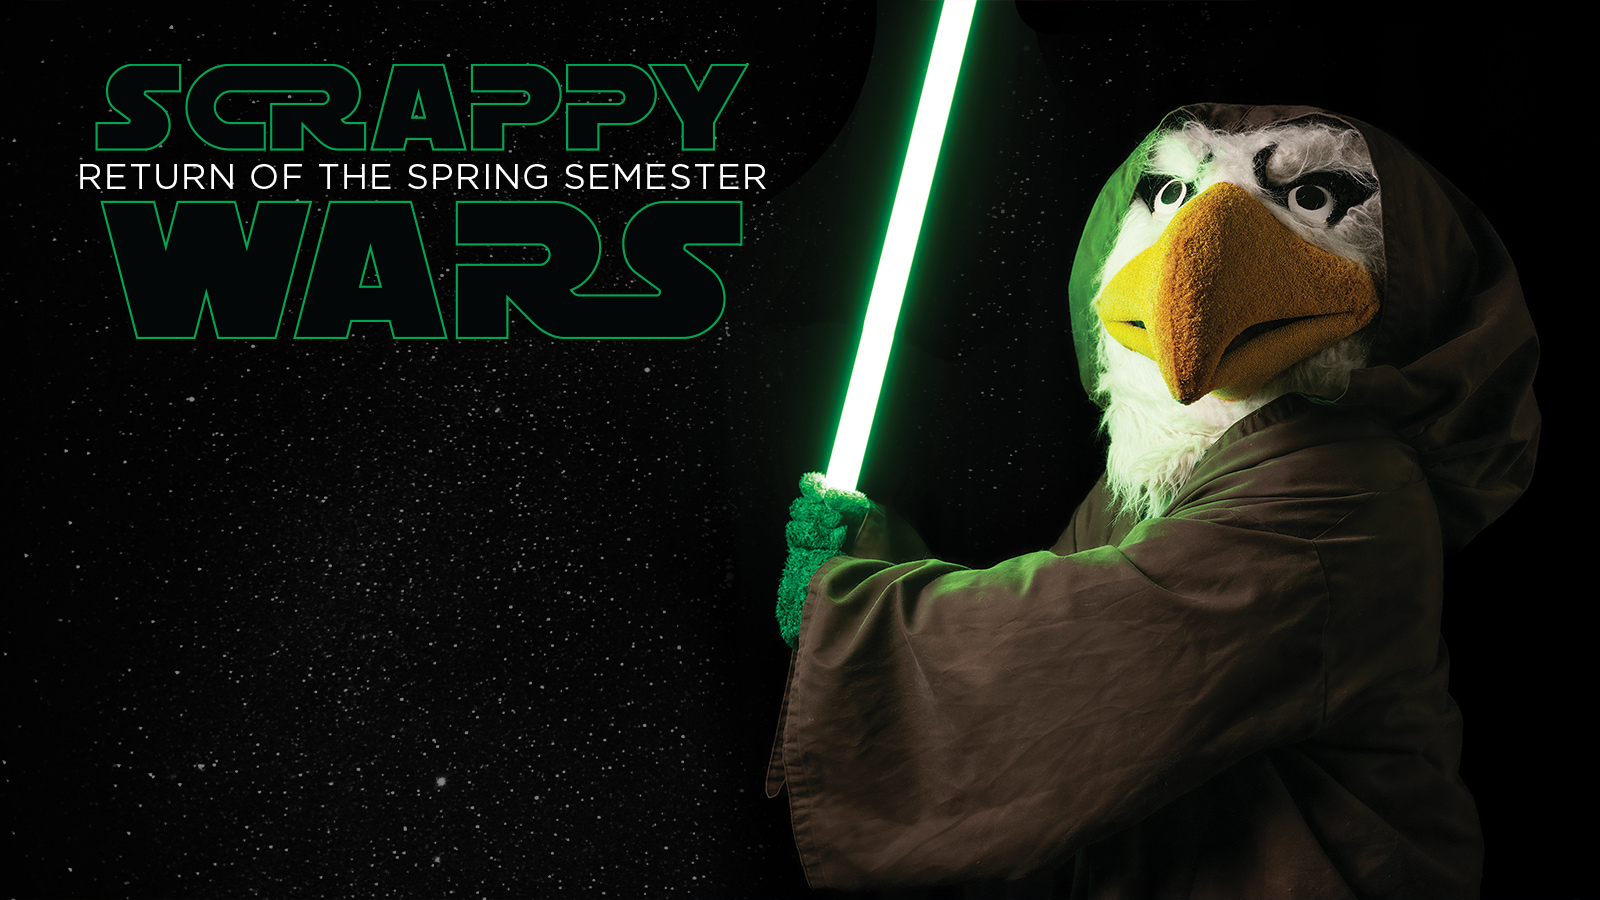 scrappy as a Jedi with text box that says "scrappy wars: Return of the Spring Semester"